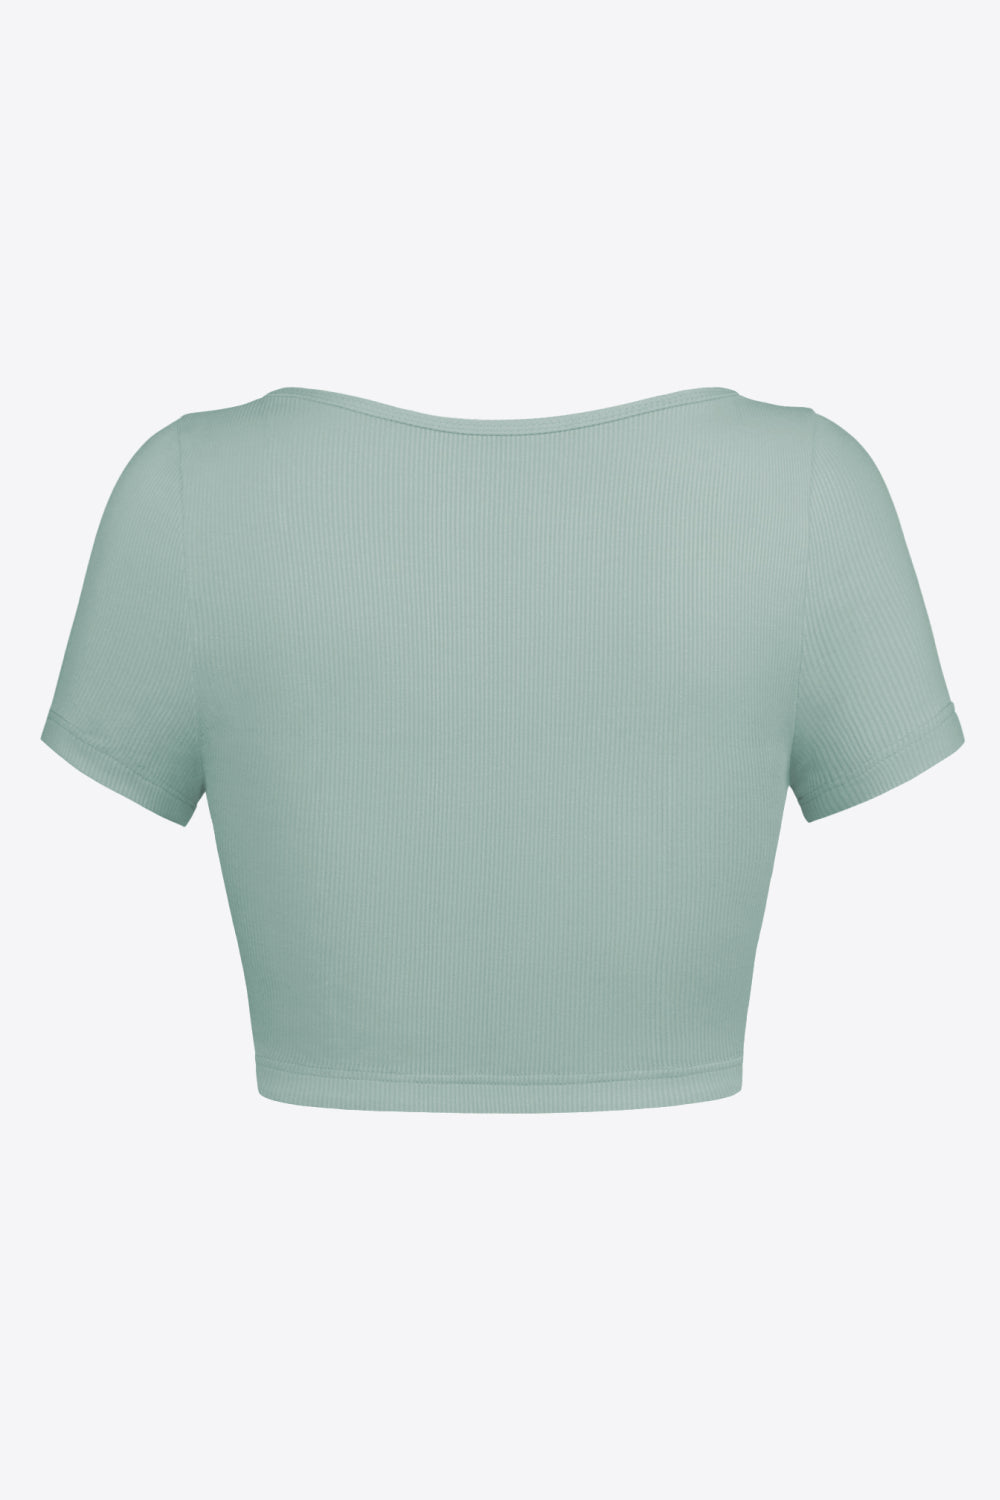 Root Ribbed Crop Top in Black, Sage, Khaki, and White